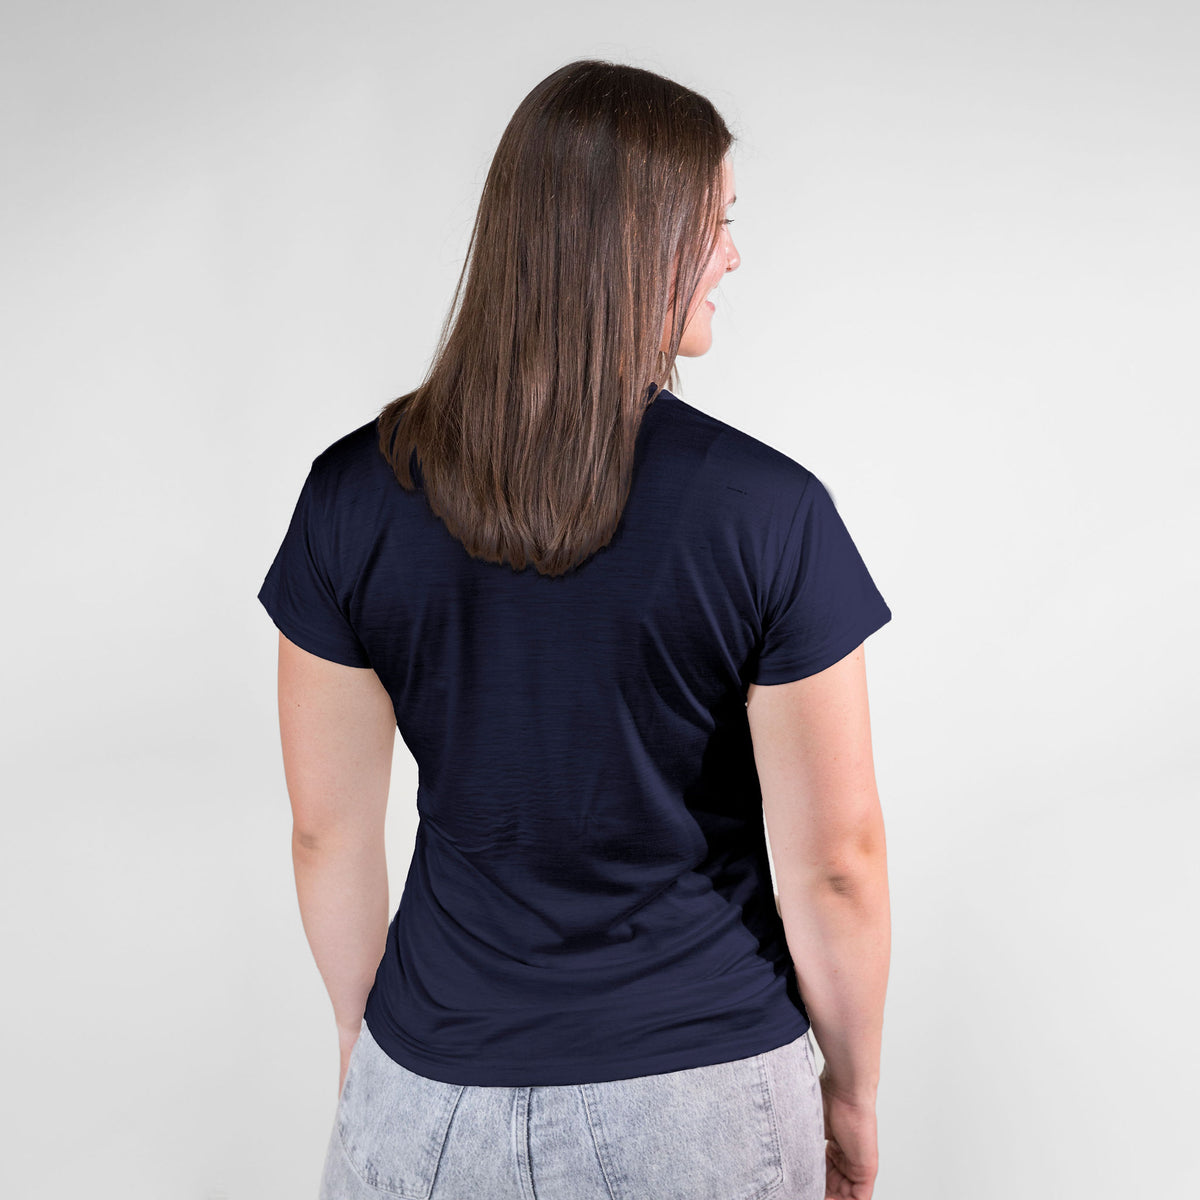 A brown haired woman facing away from the camera against a white background. She is wearing gray jeans and a navy blue Alpacas of Montana lightweight athletic activewear outerwear breathable moisture wicking antimicrobial soft comfortable exercise short sleeve alpaca women&#39;s performance tee for running sports exercise work out hiking climbing camping biking